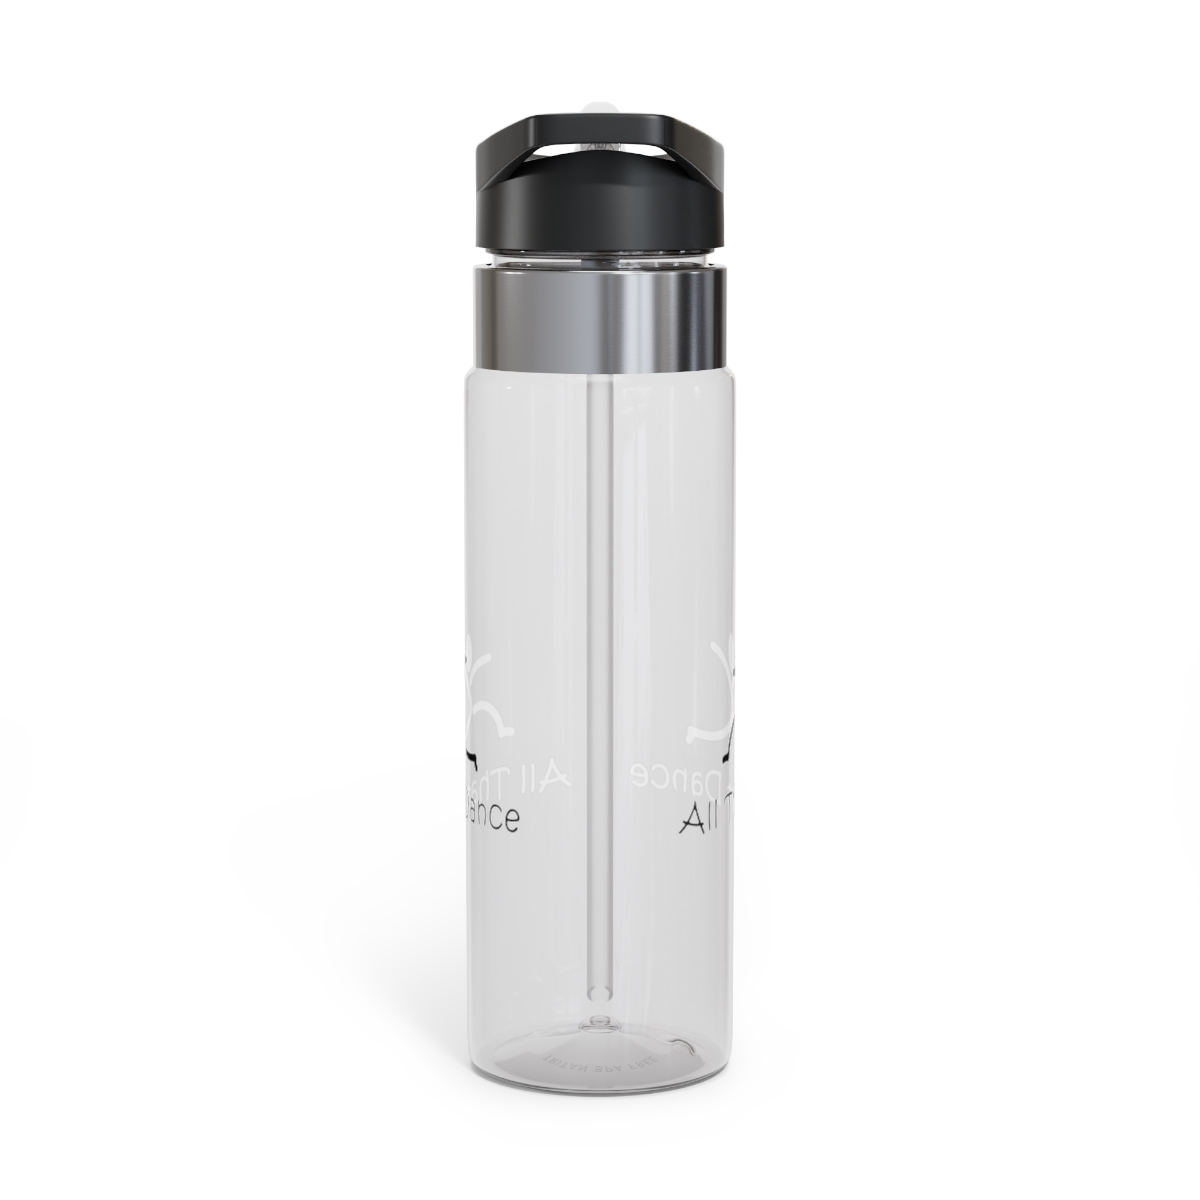 All That Dance 20oz Sports Bottle product thumbnail image